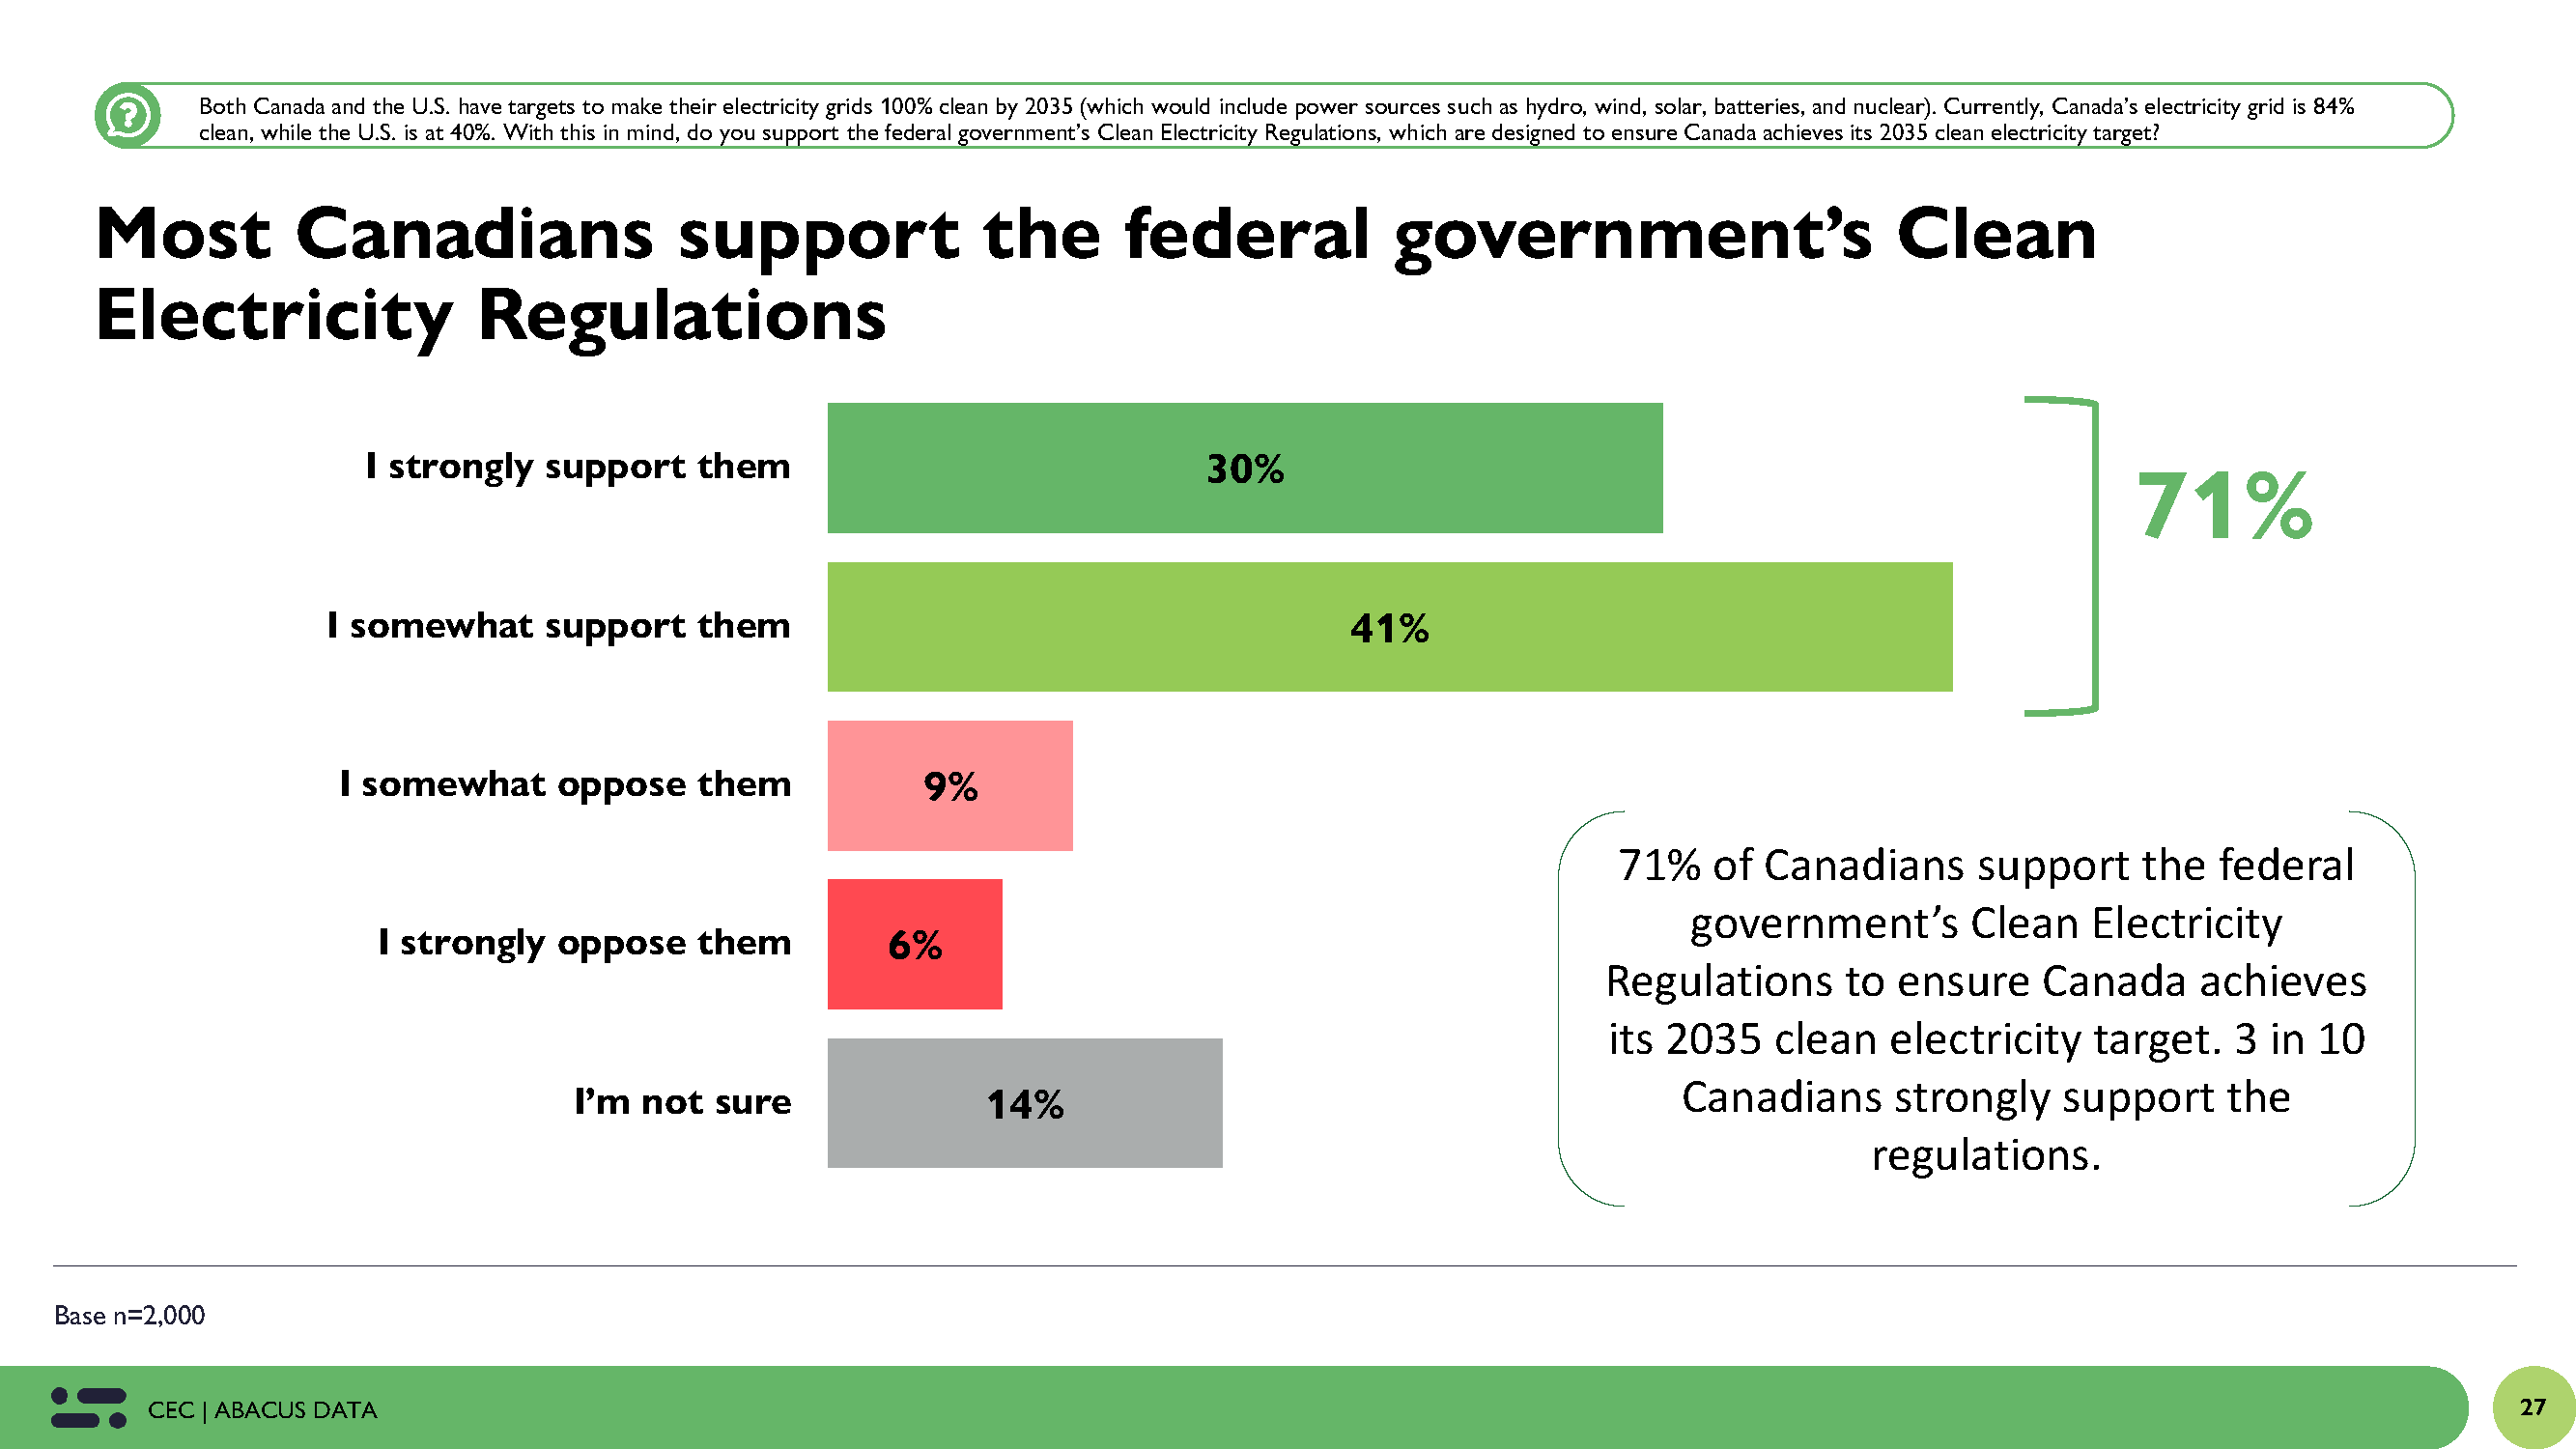 Poll: Most Canadians support the federal governments Clean Electricity Regulations